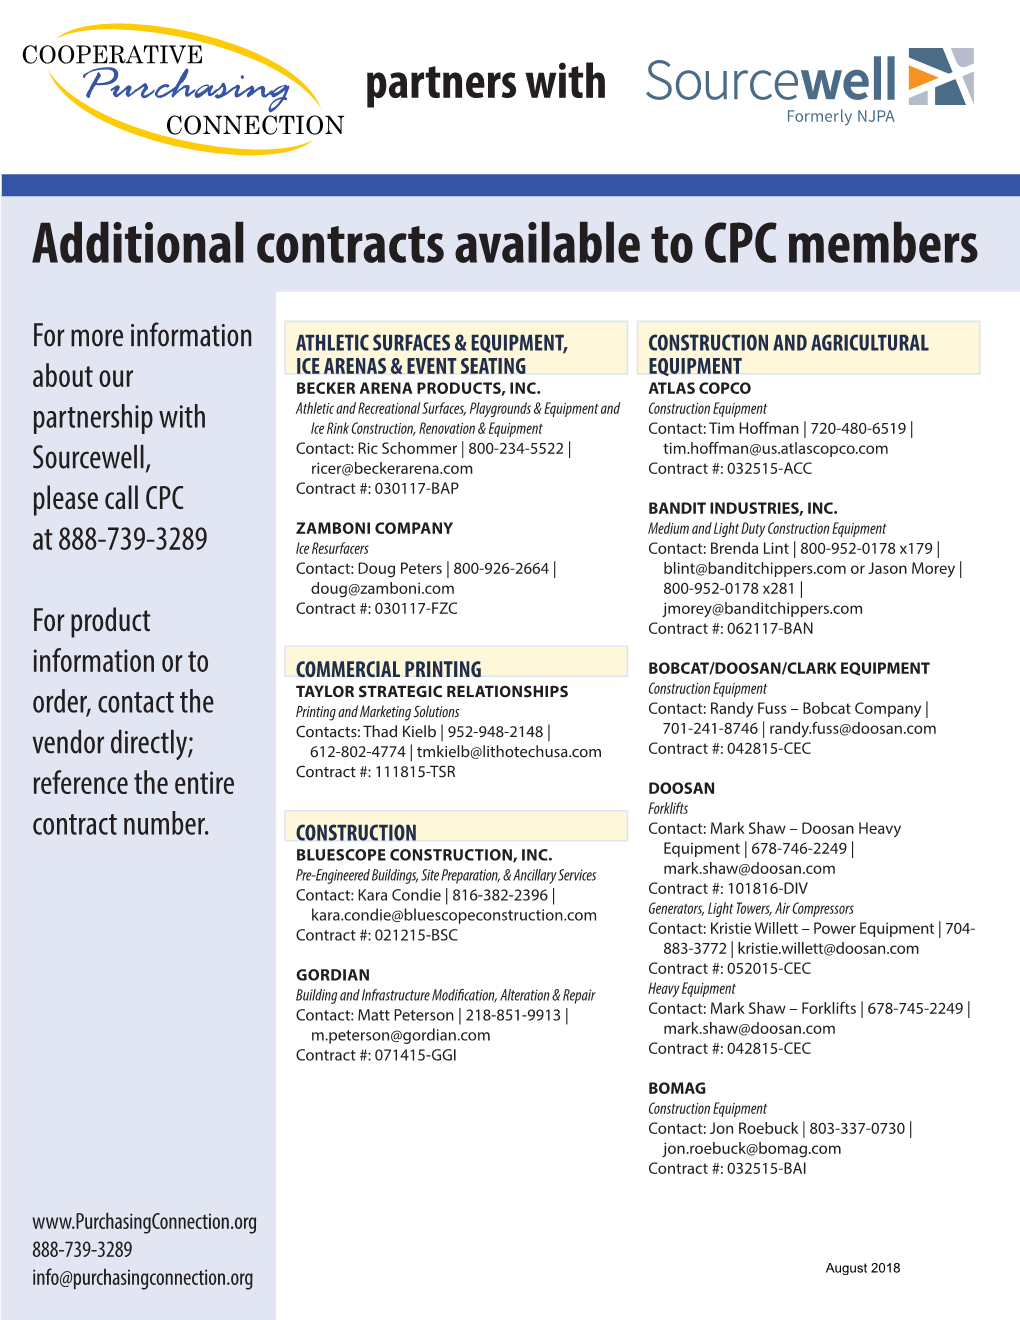 Additional Contracts Available to CPC Members